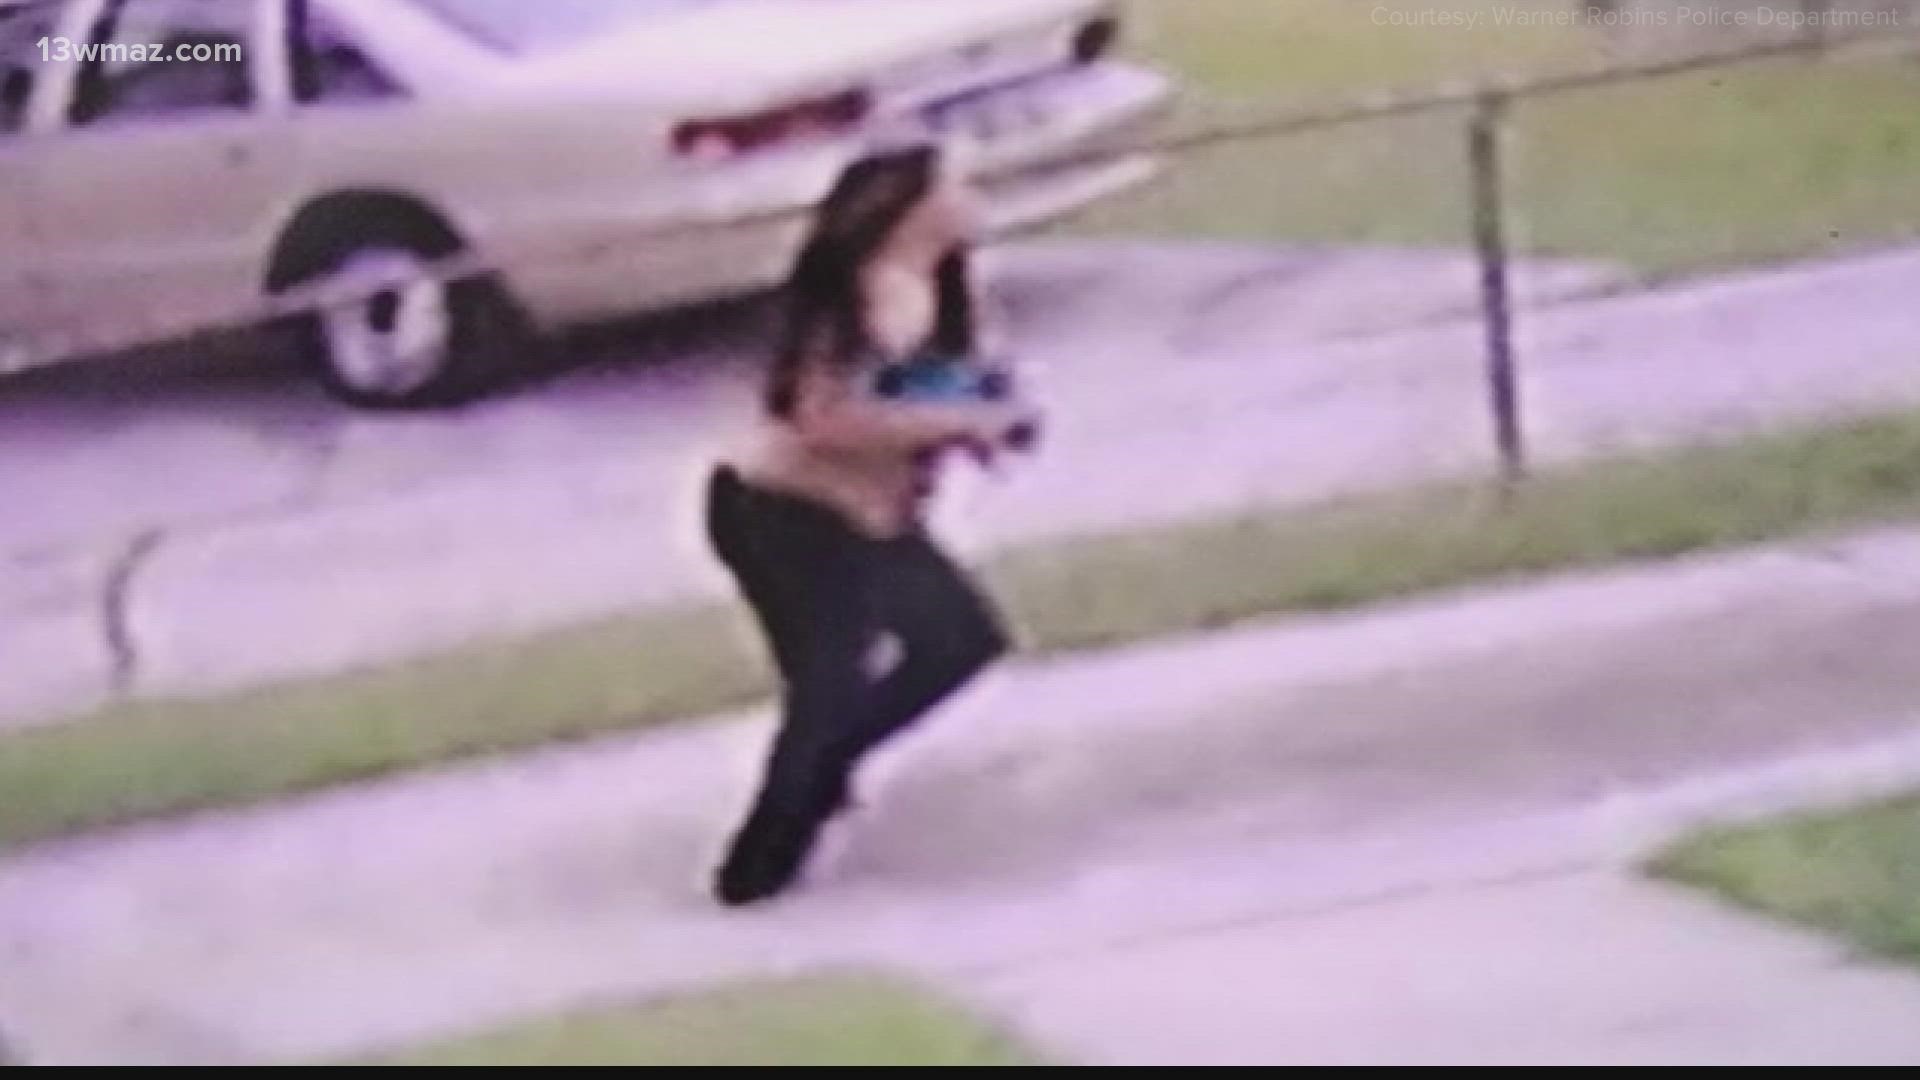 The woman was seen fleeing the scene after the incident.